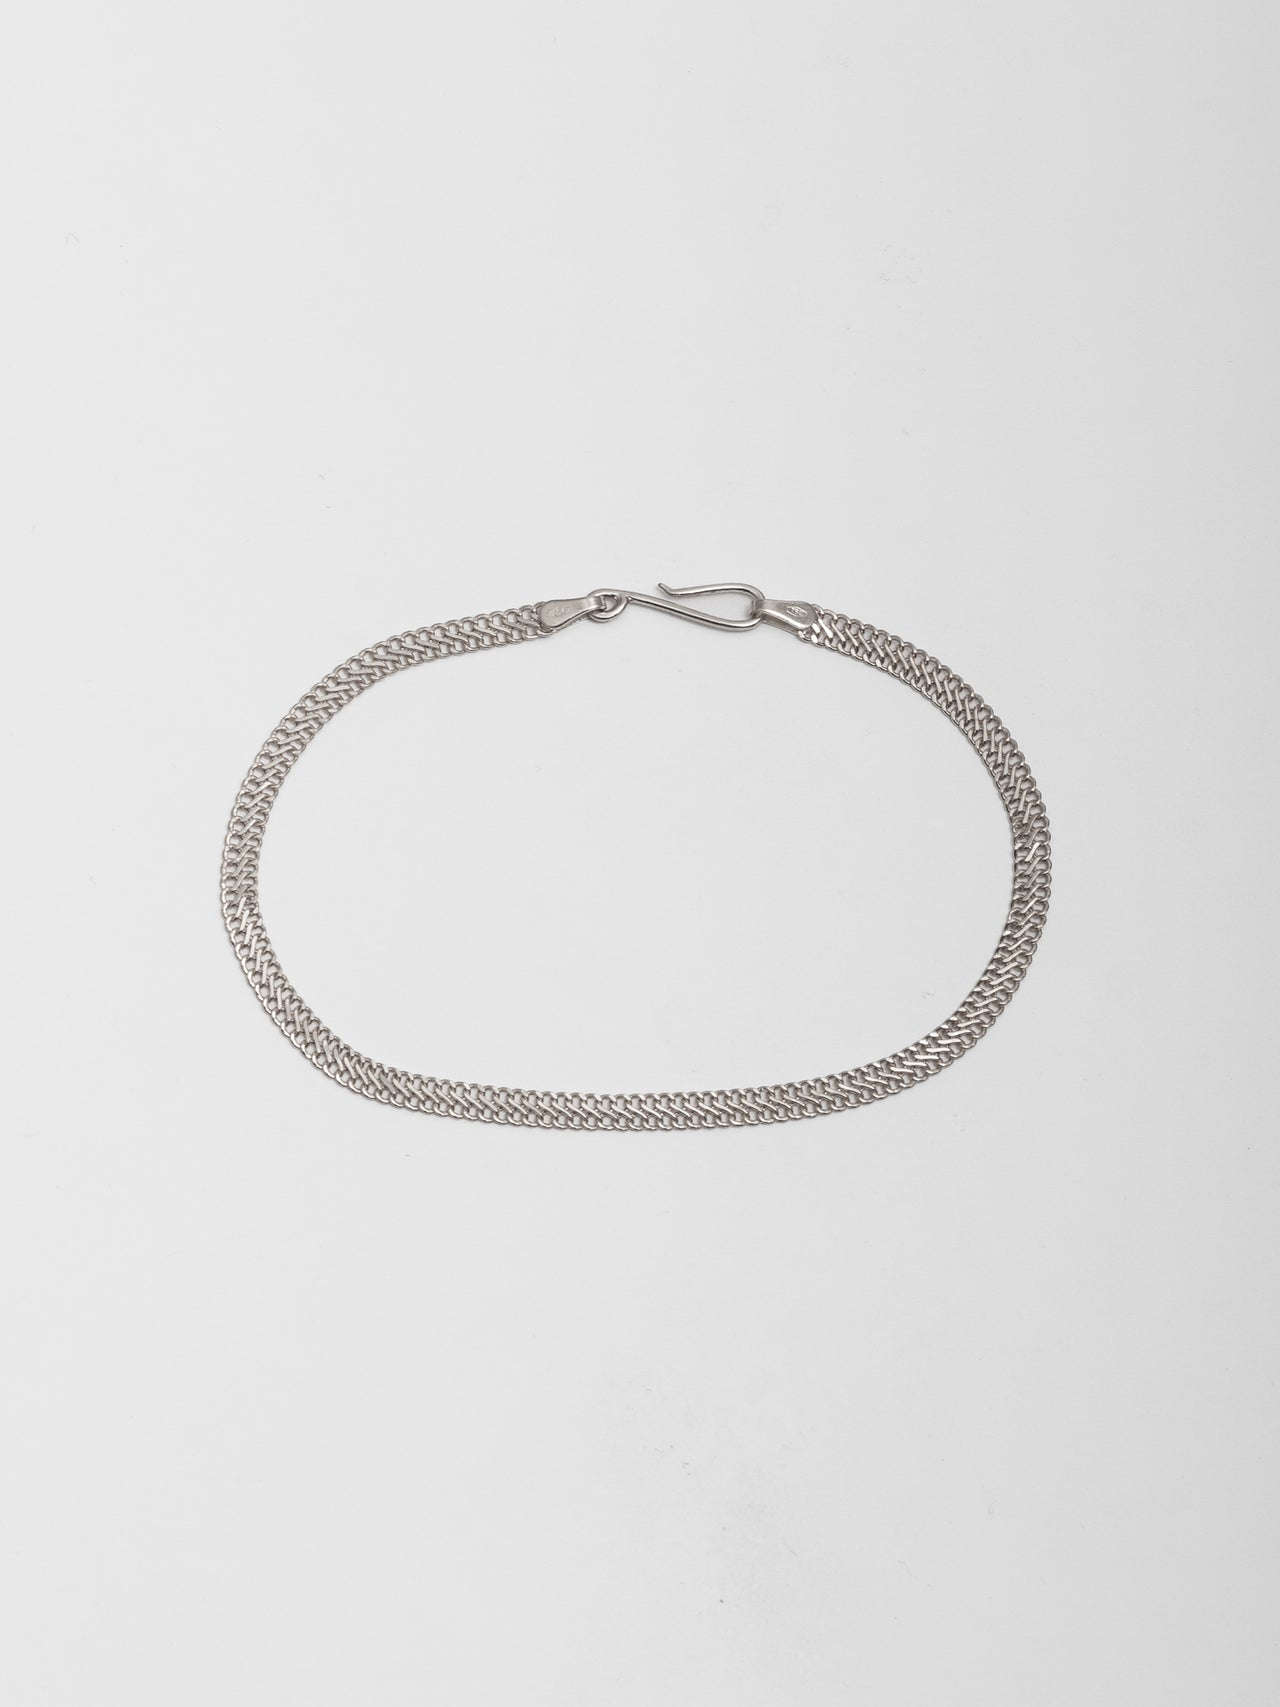 Sterling Silver Mesh Chain Bracelet pictured on light grey background.  